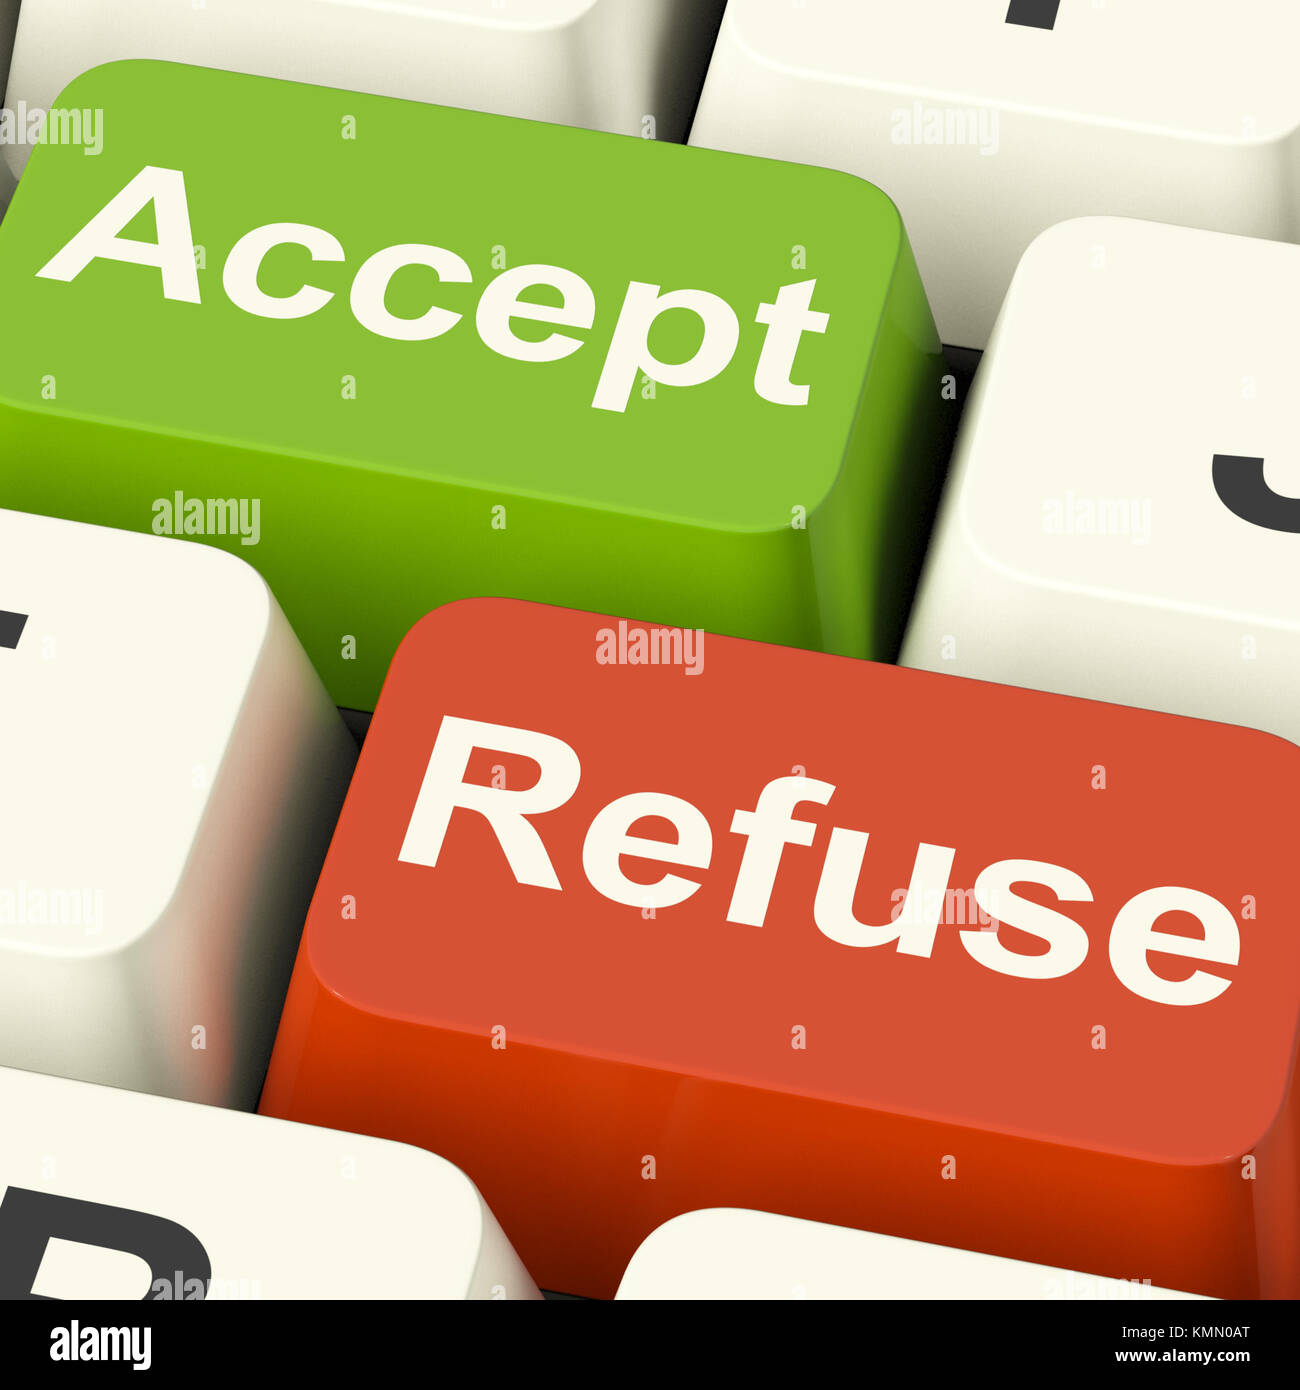 Accept And Refuse Keys Show Acceptance Or Denial Stock Photo